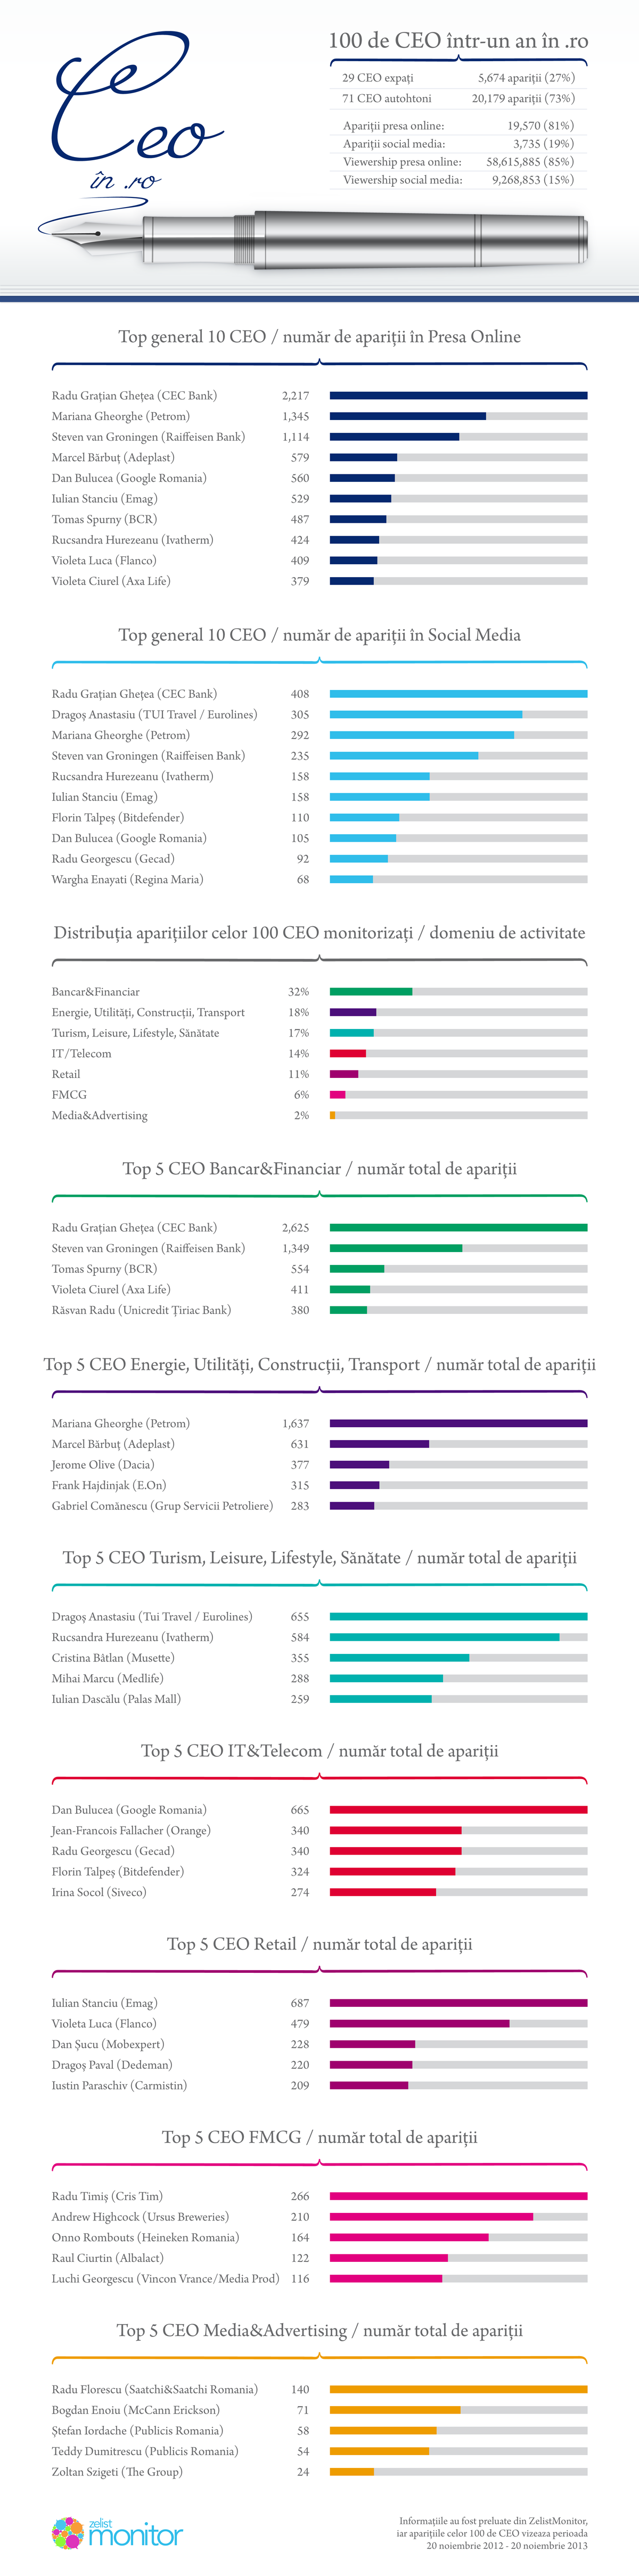 infographic_ceo